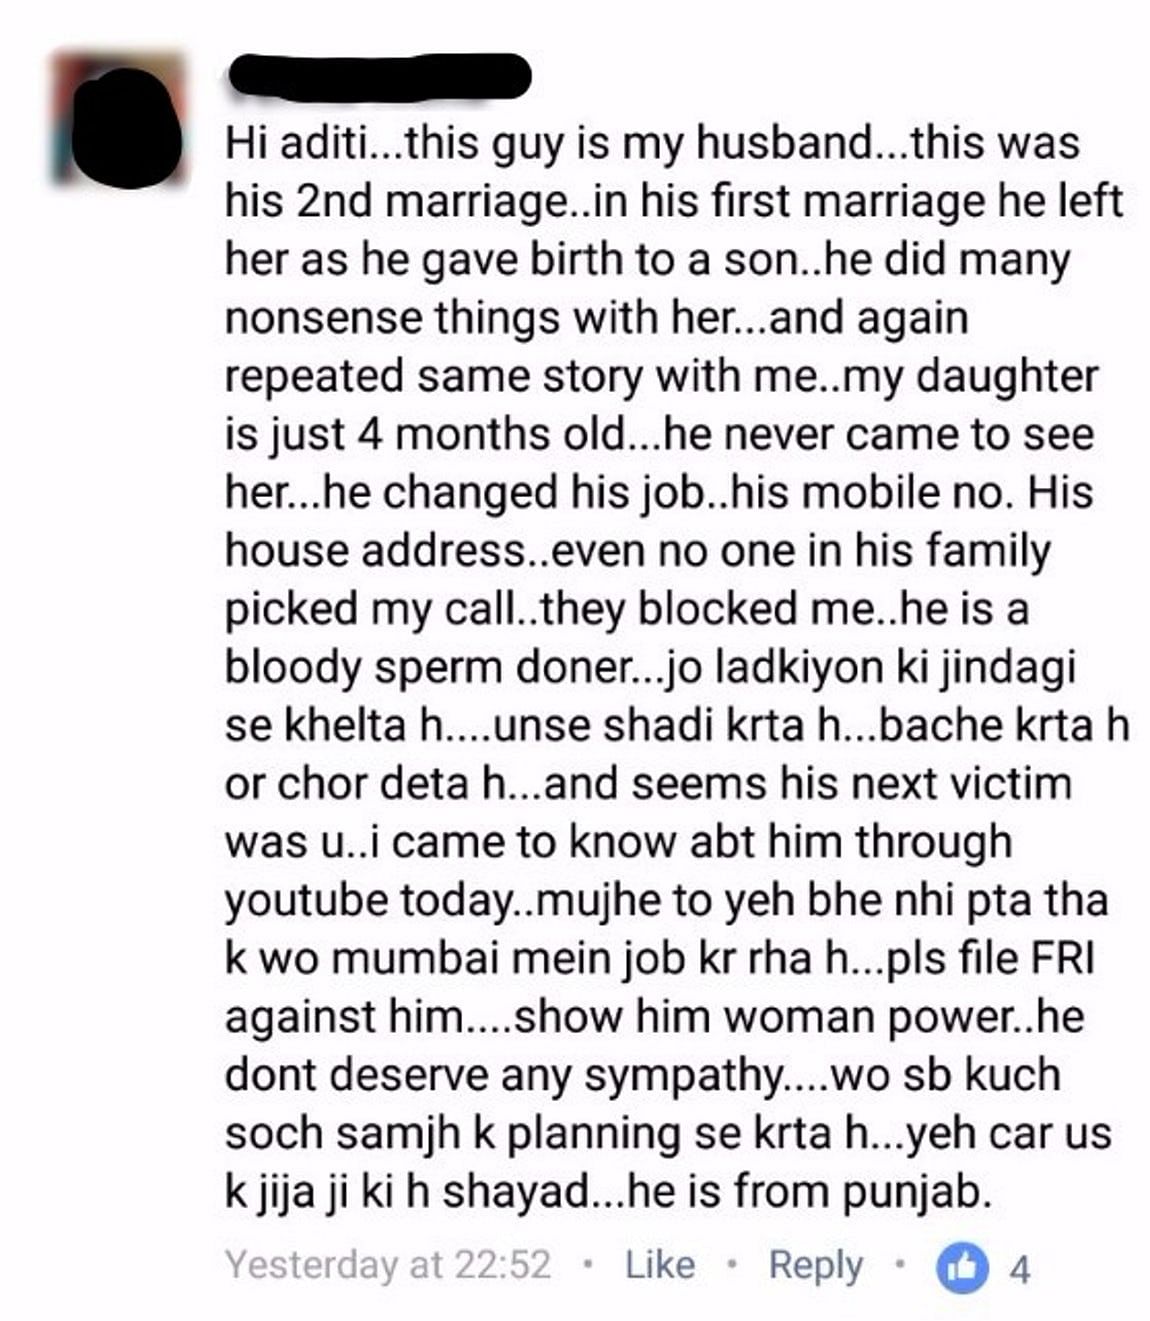 After urging  Aditi to take action, the woman plans to file a criminal complaint alleging cruelty & unnatural sex.